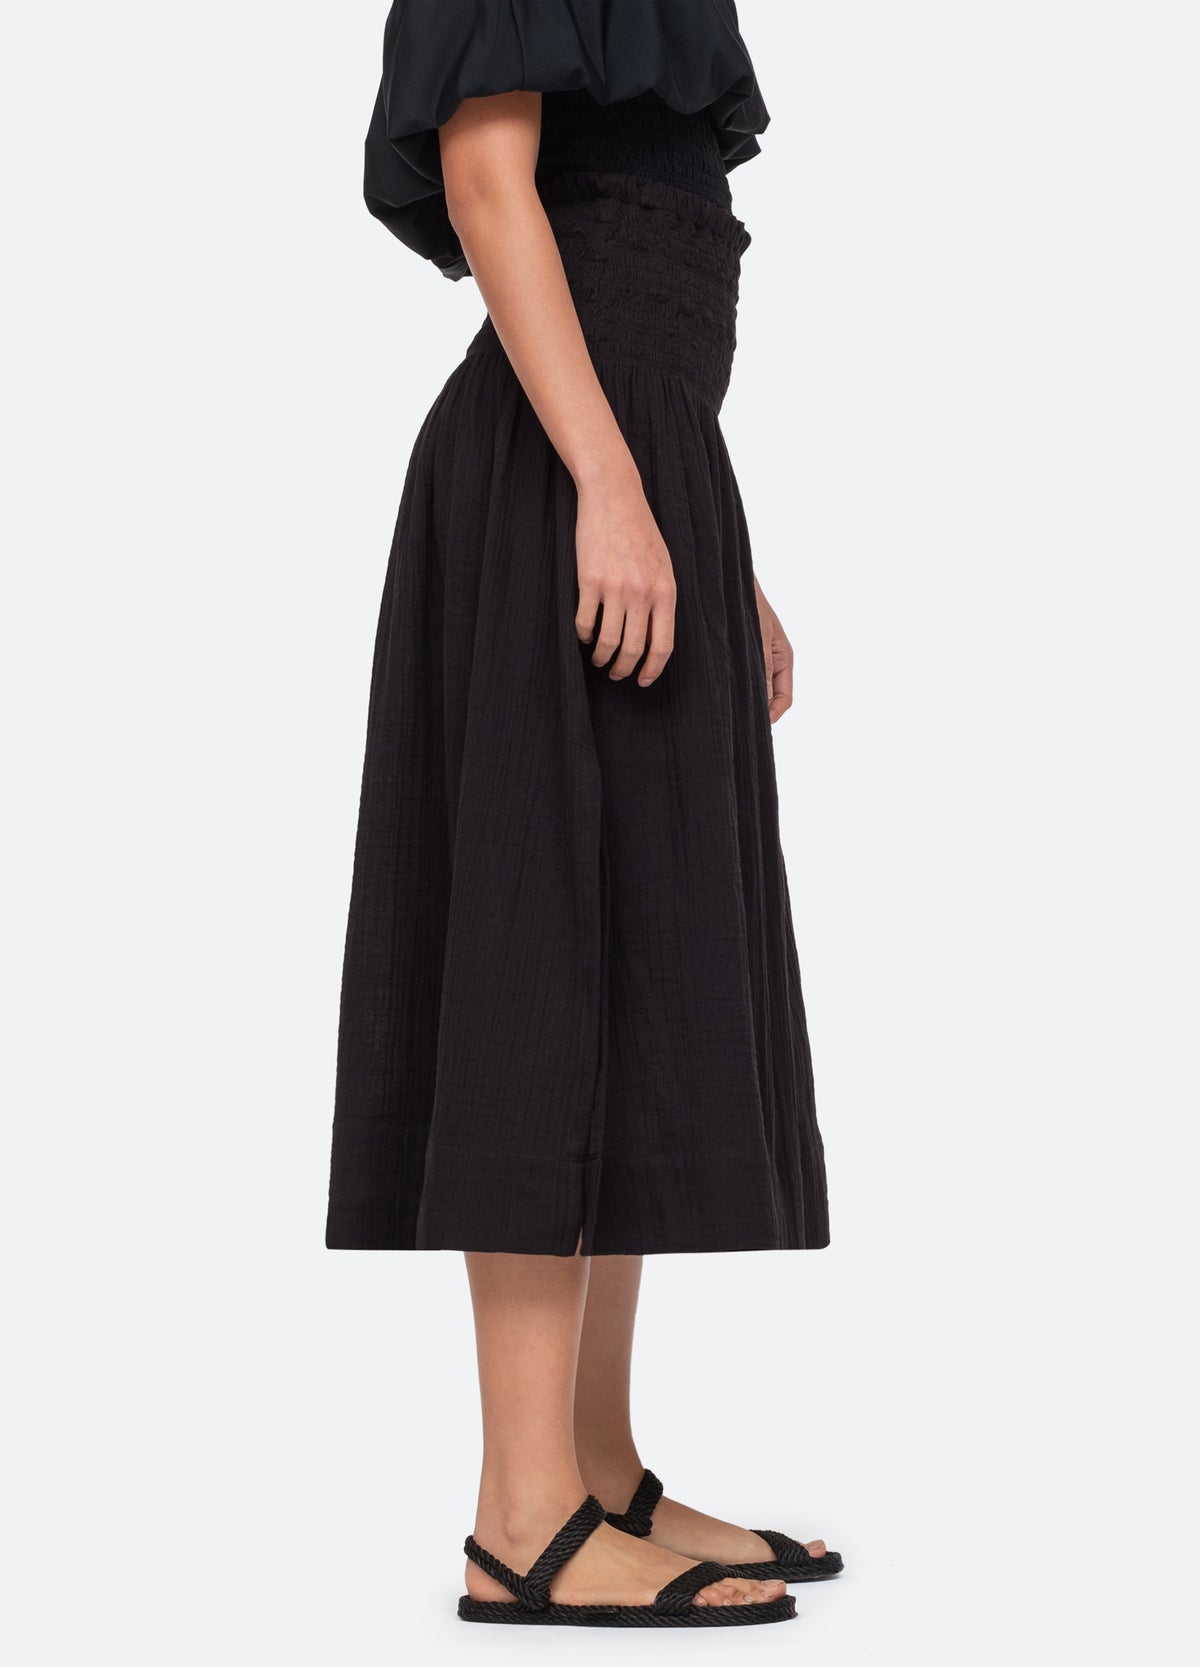 black-sophie skirt coverup-side view - 5